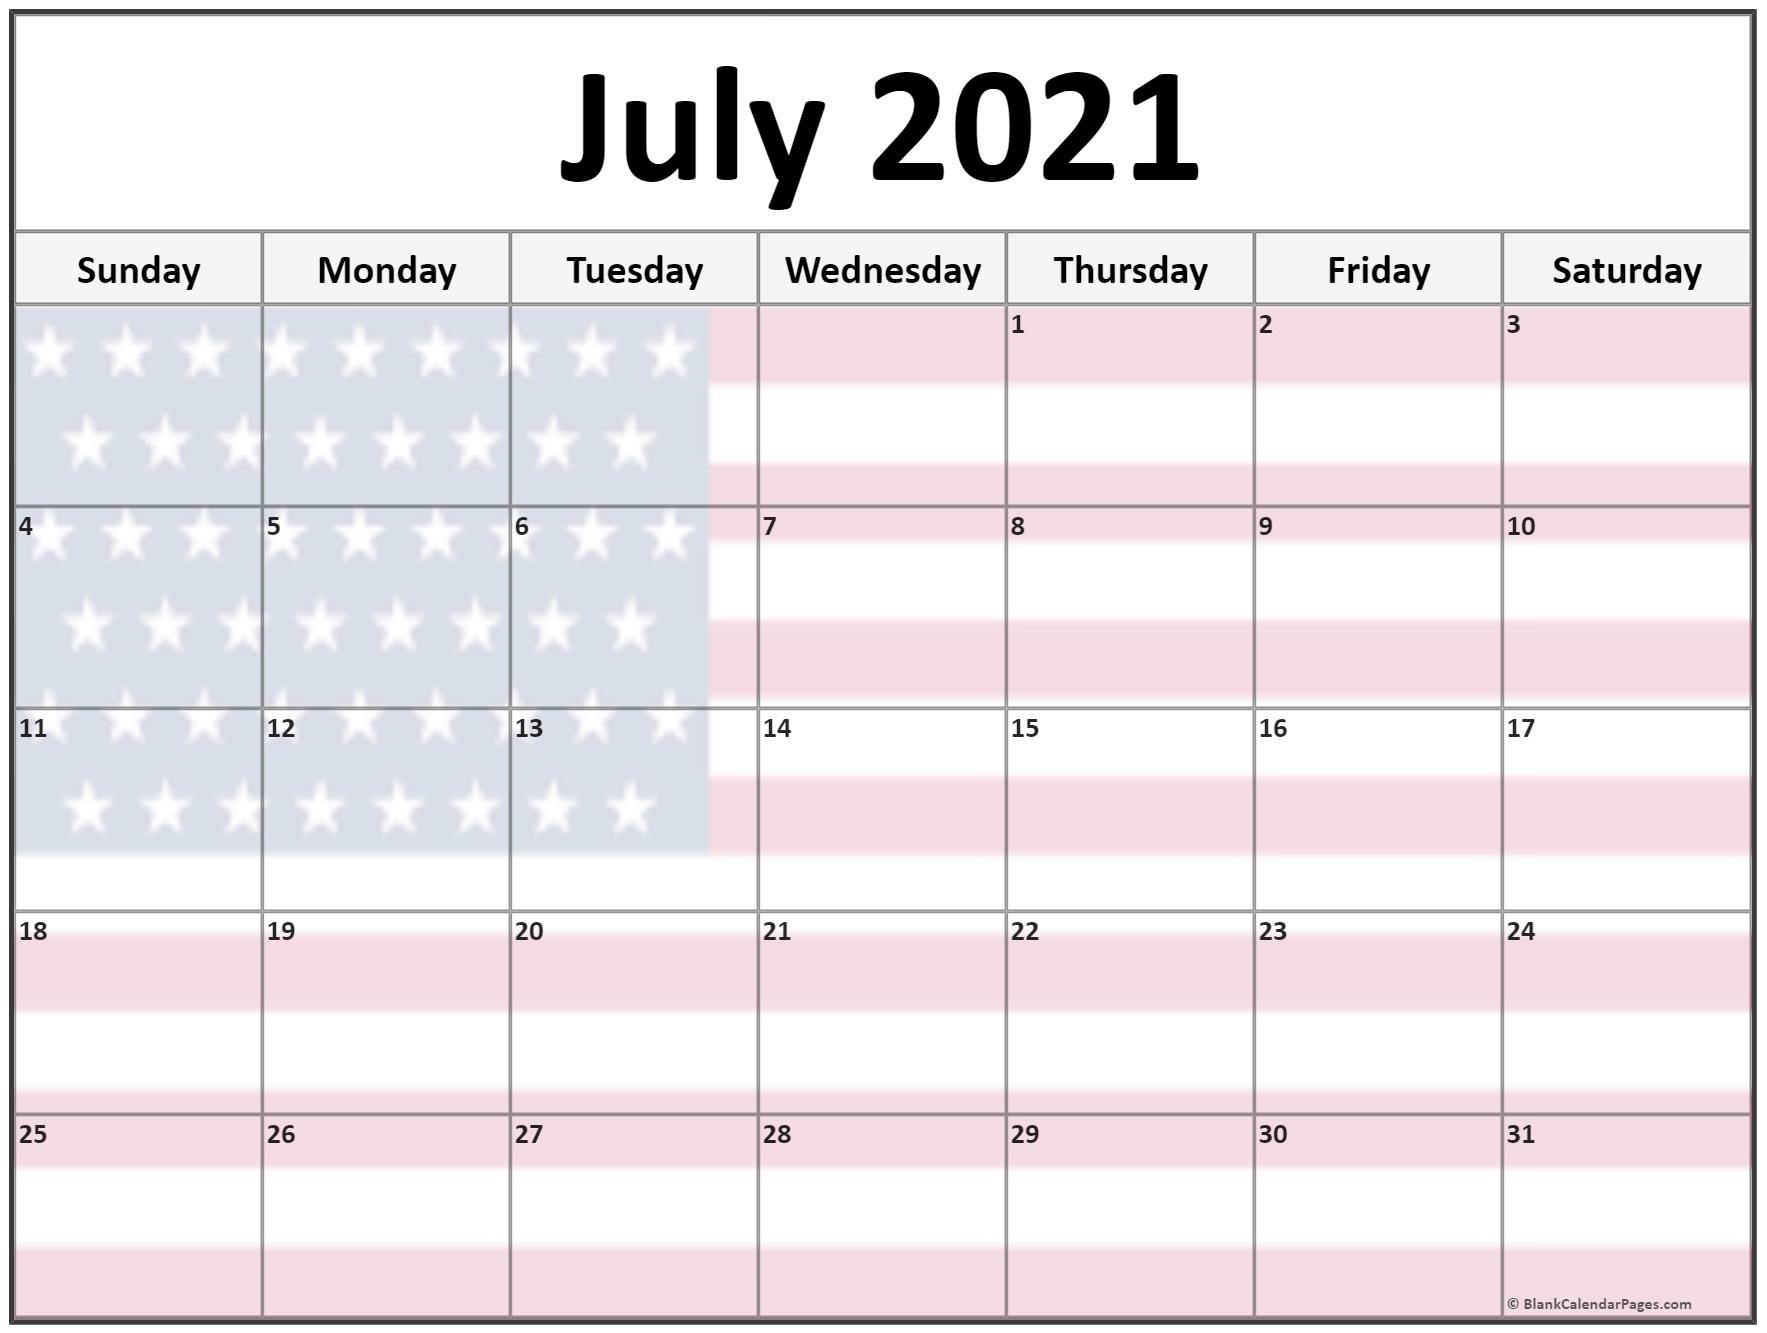 Collection Of July 2021 Photo Calendars With Image Filters. Online Calendar July 2021